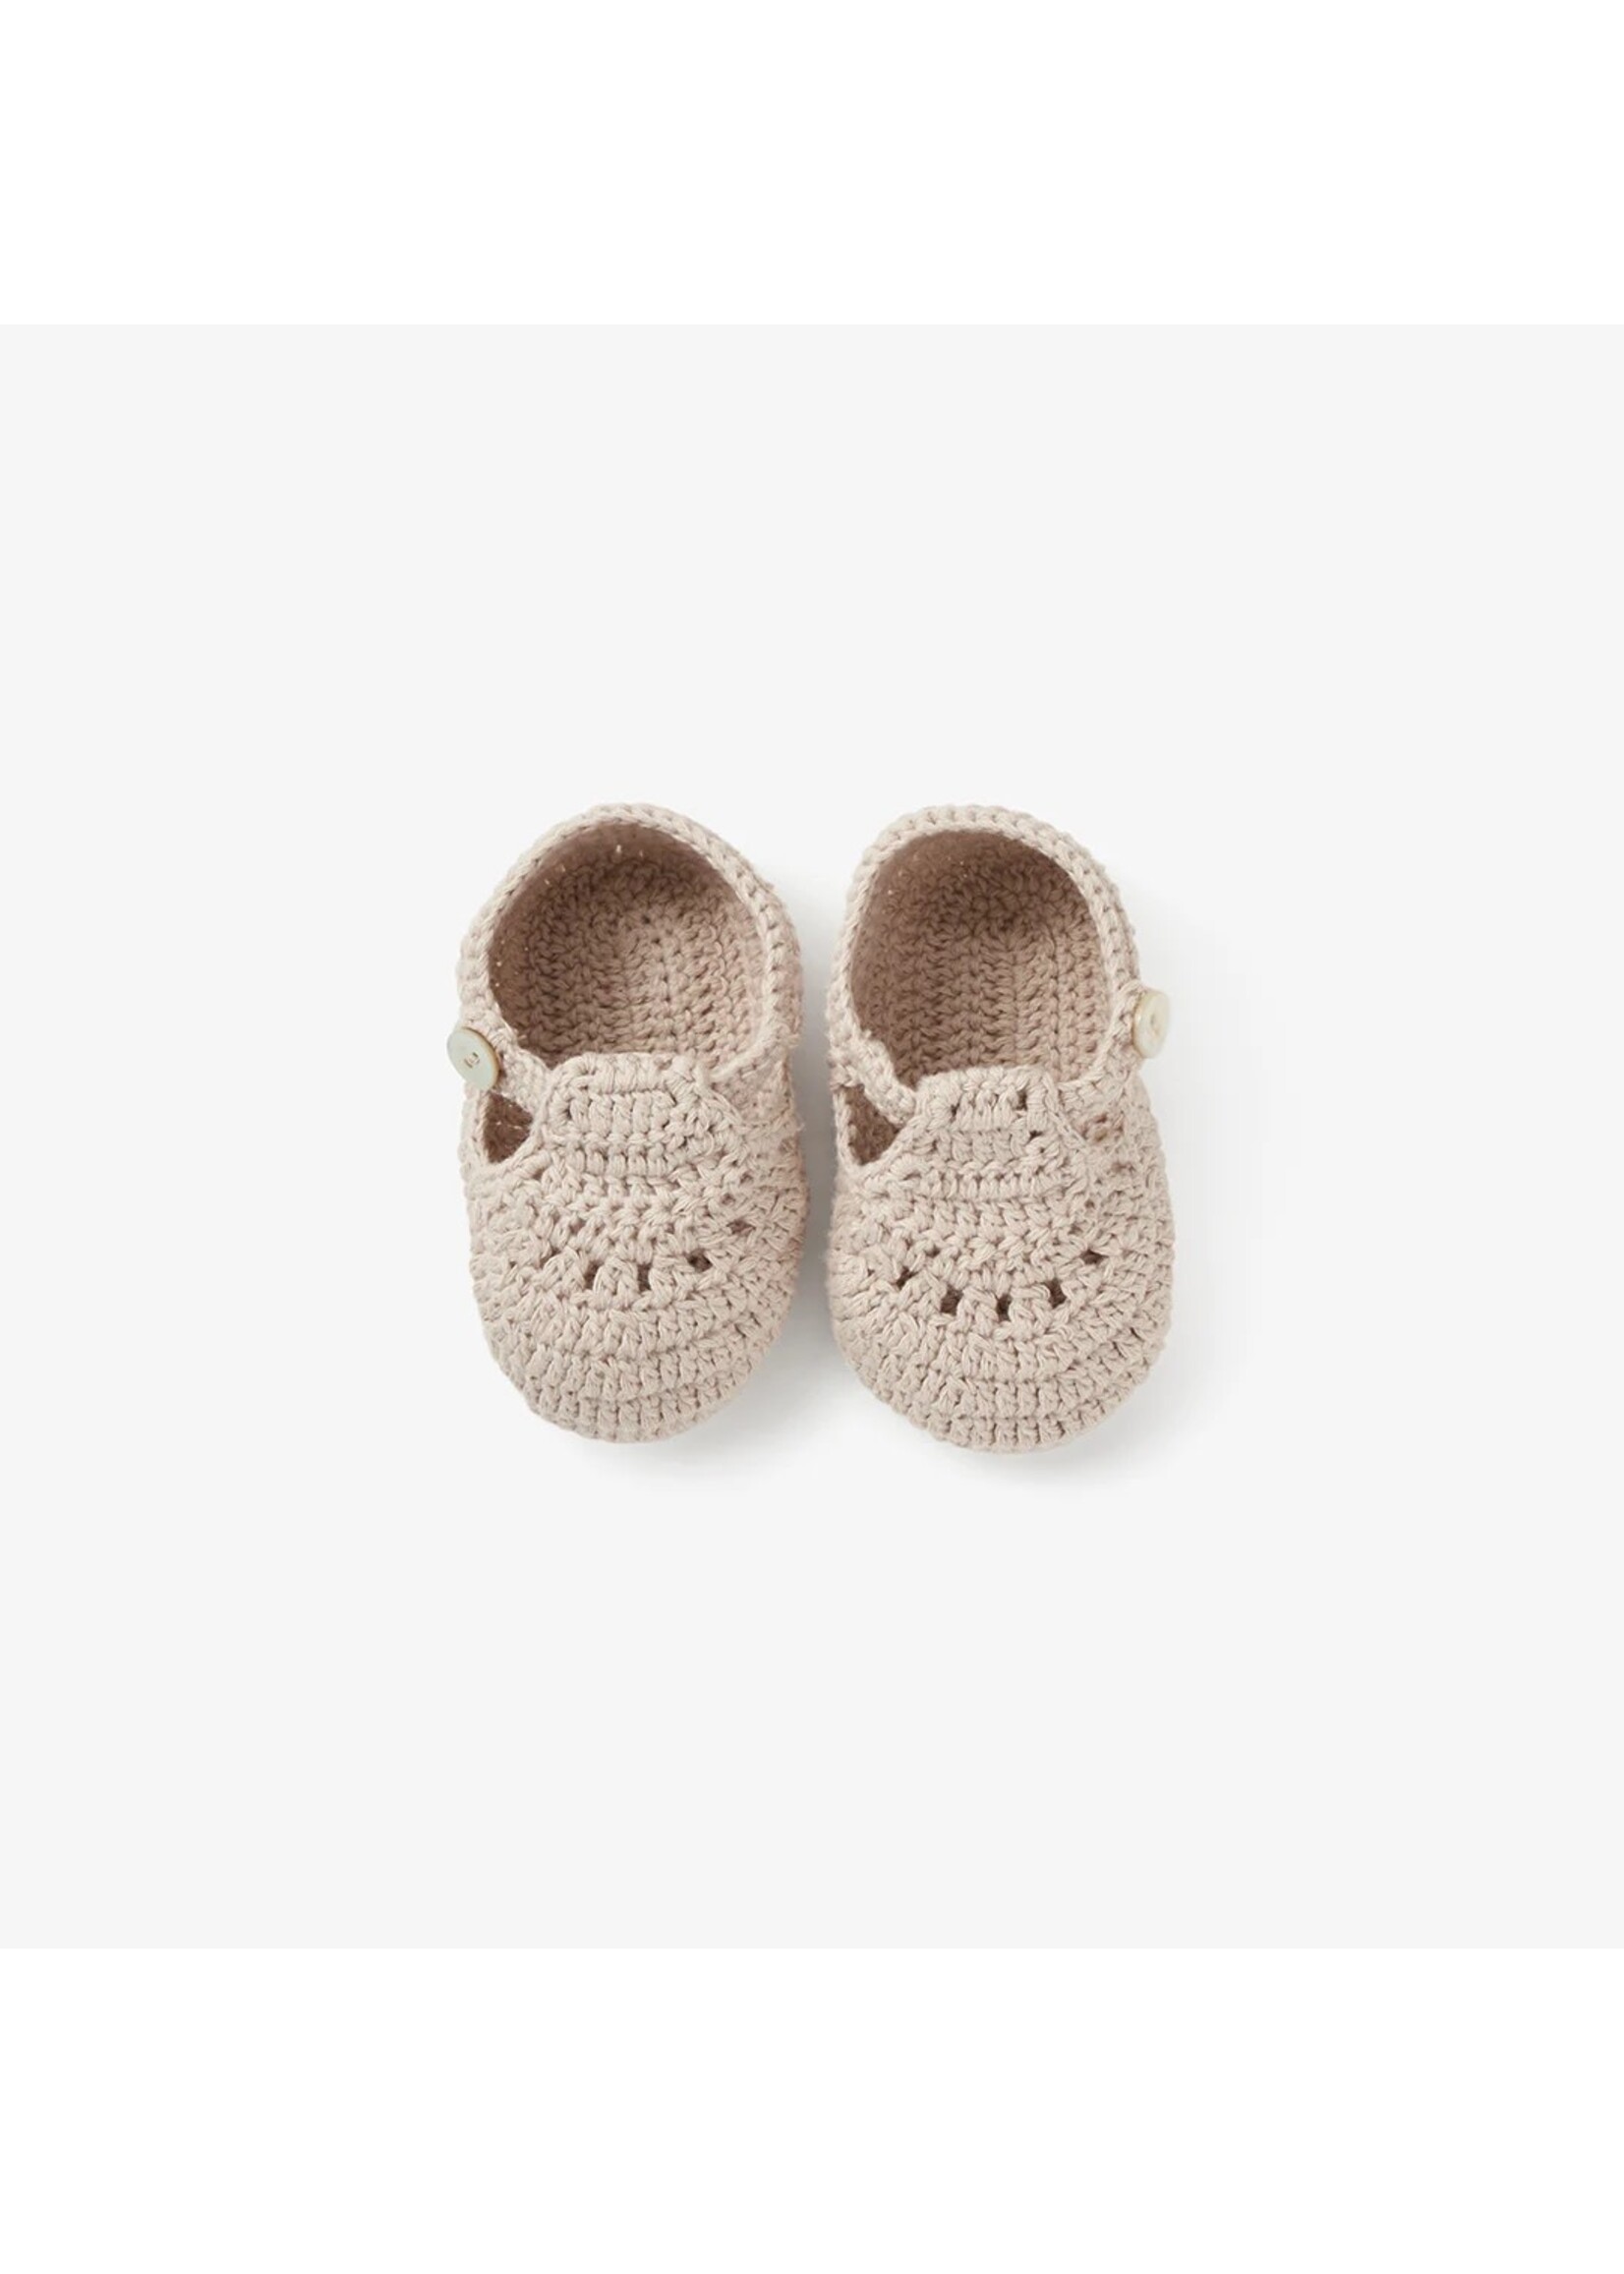 T-Strap Hand Crocheted Baby Booties - Taupe